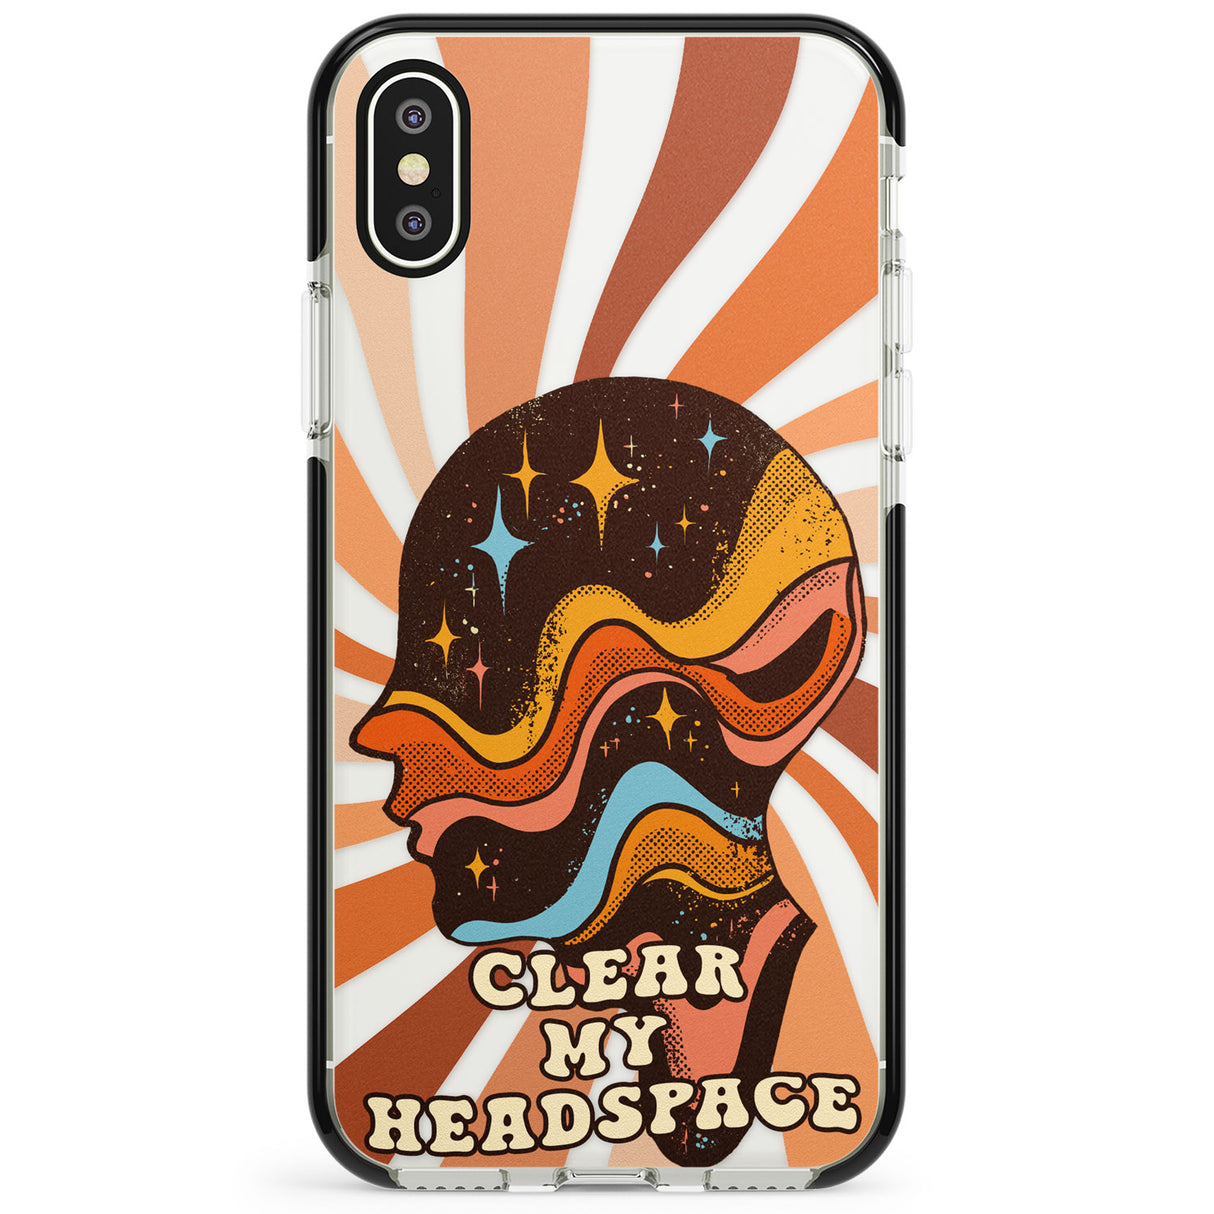 Clear My Headspace Phone Case for iPhone X XS Max XR